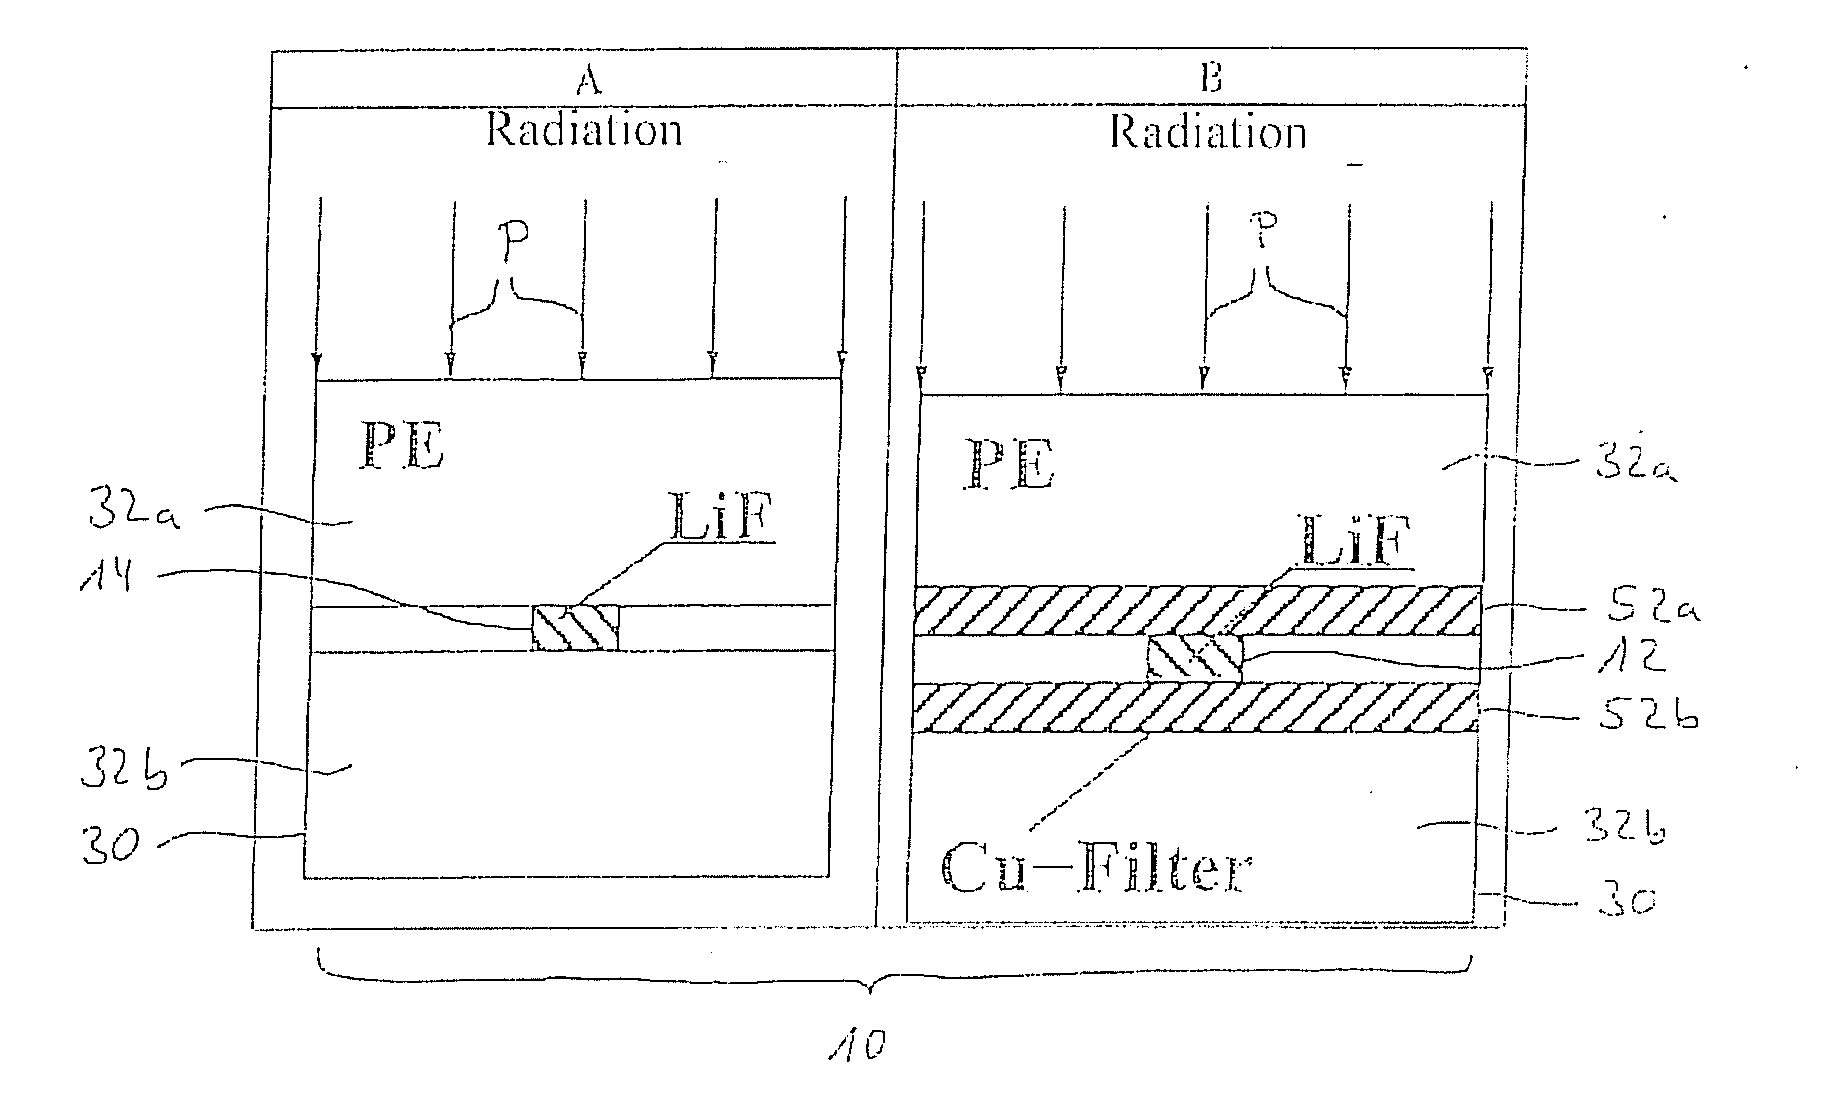 Local Dosimeter for Measuring the Ambient Equivalent Dose of Photon Radiation, and Reading Method